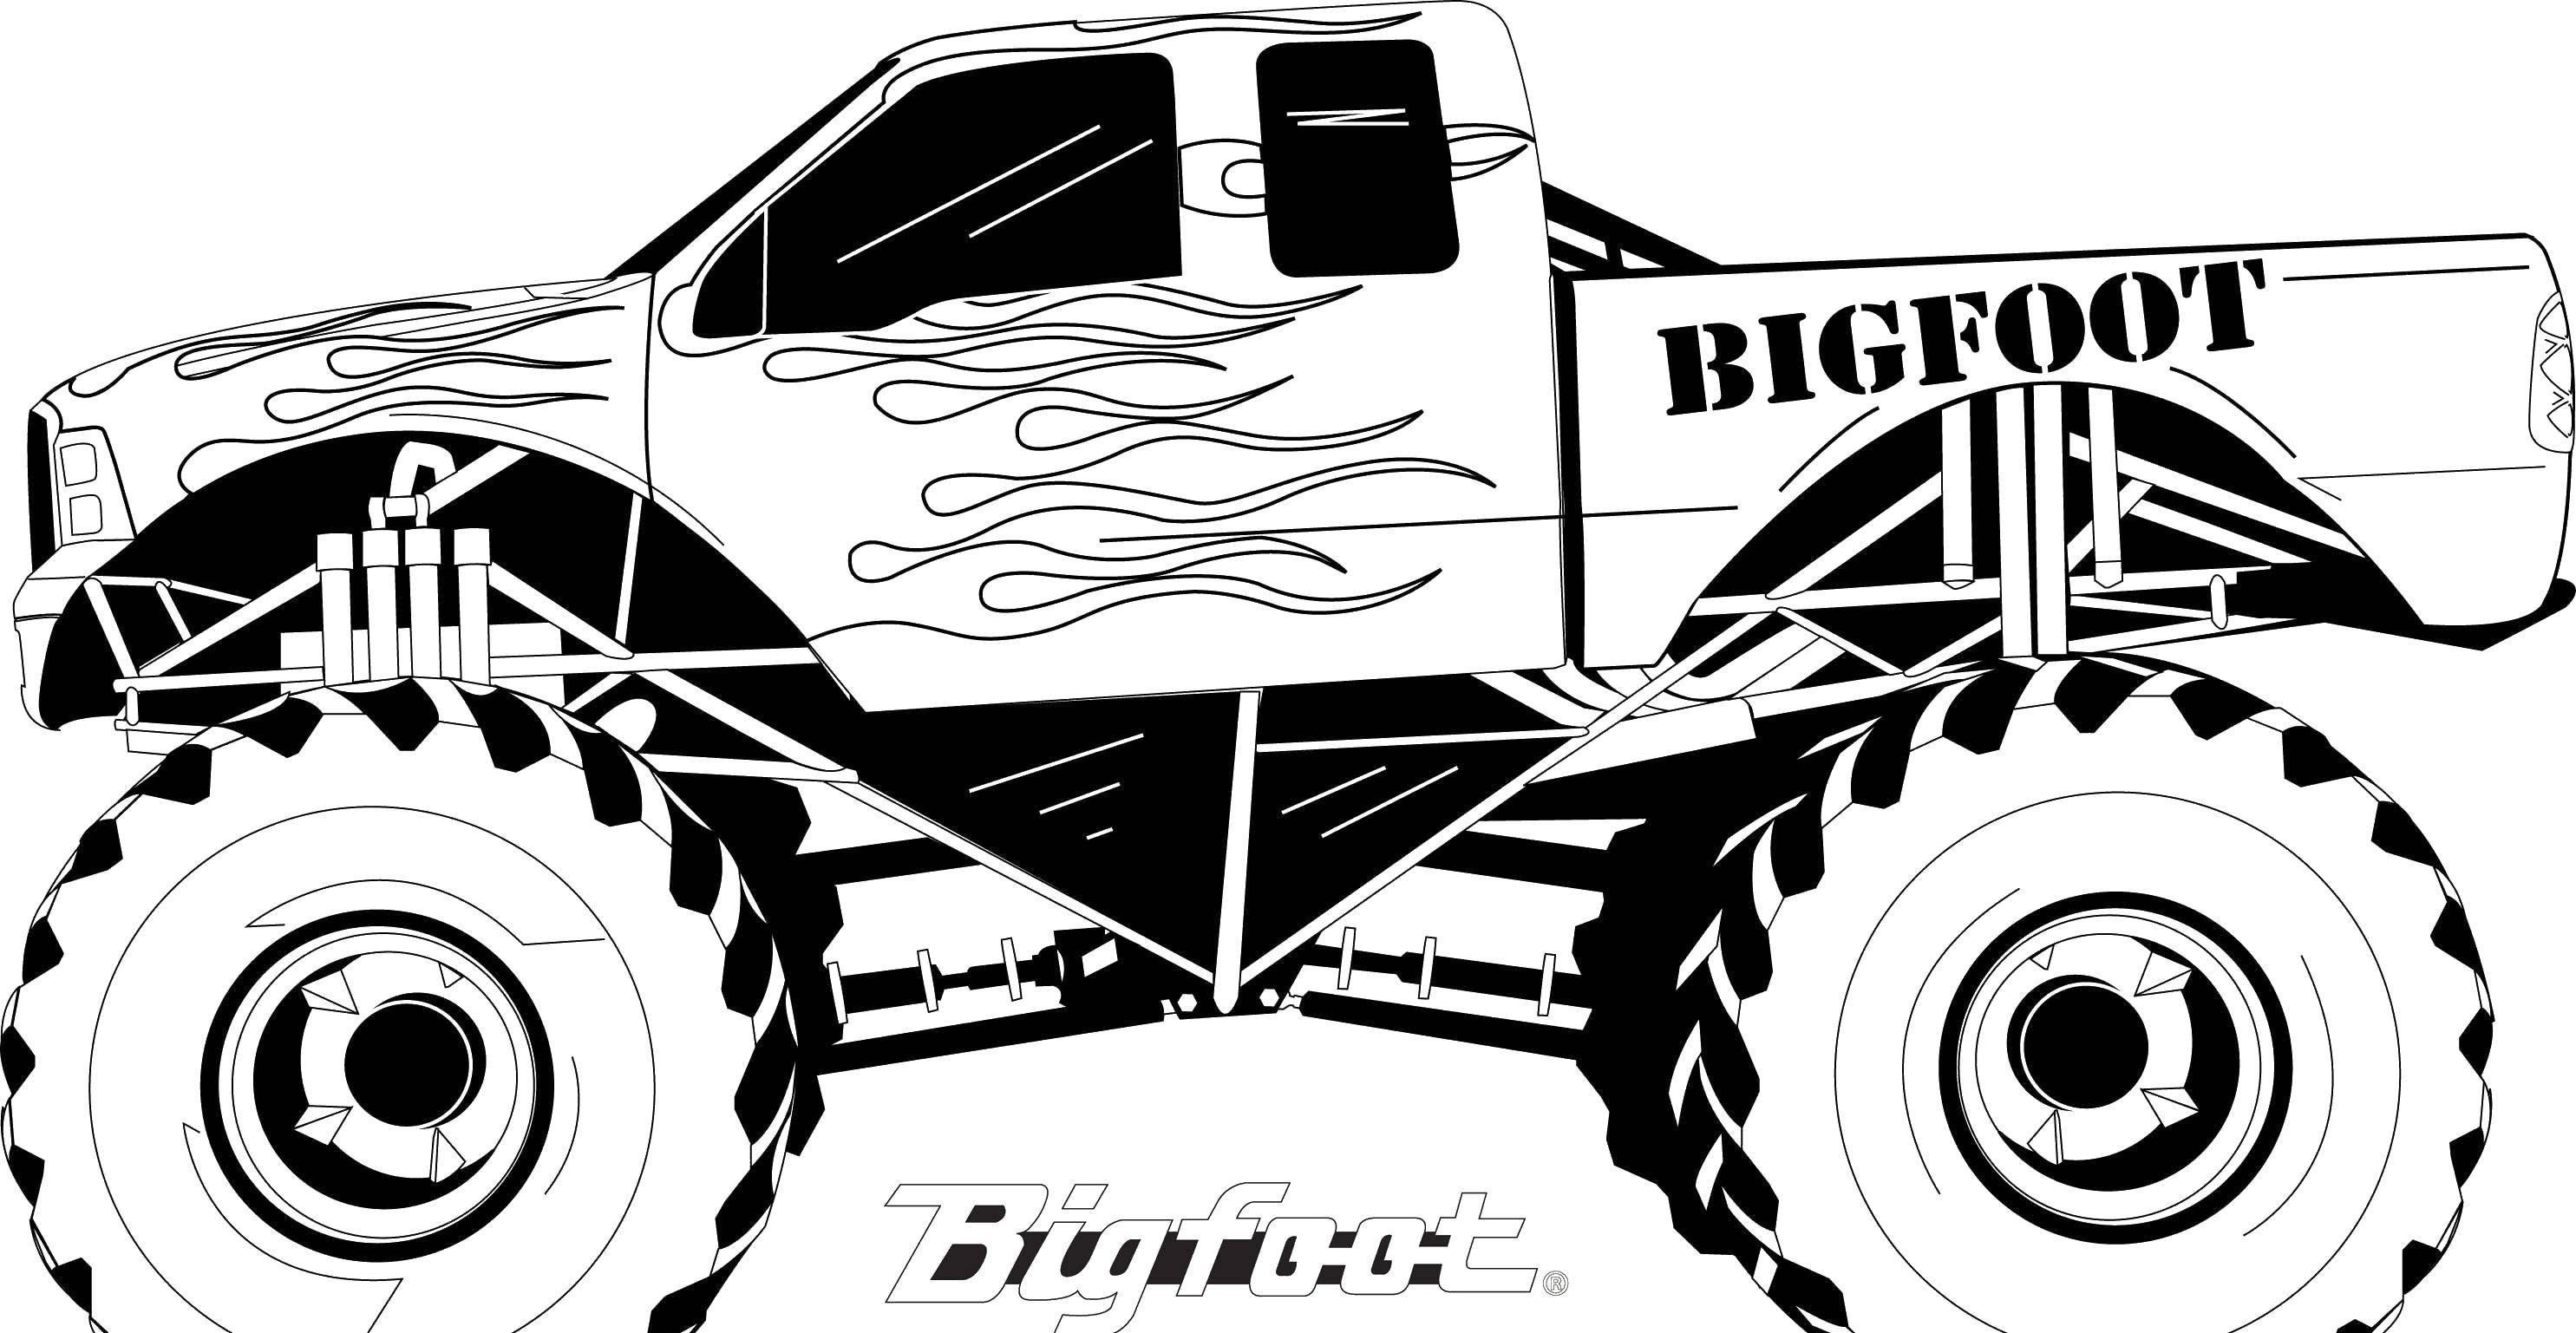 Coloring Bigfoot. Category transportation. Tags:  Transformers.